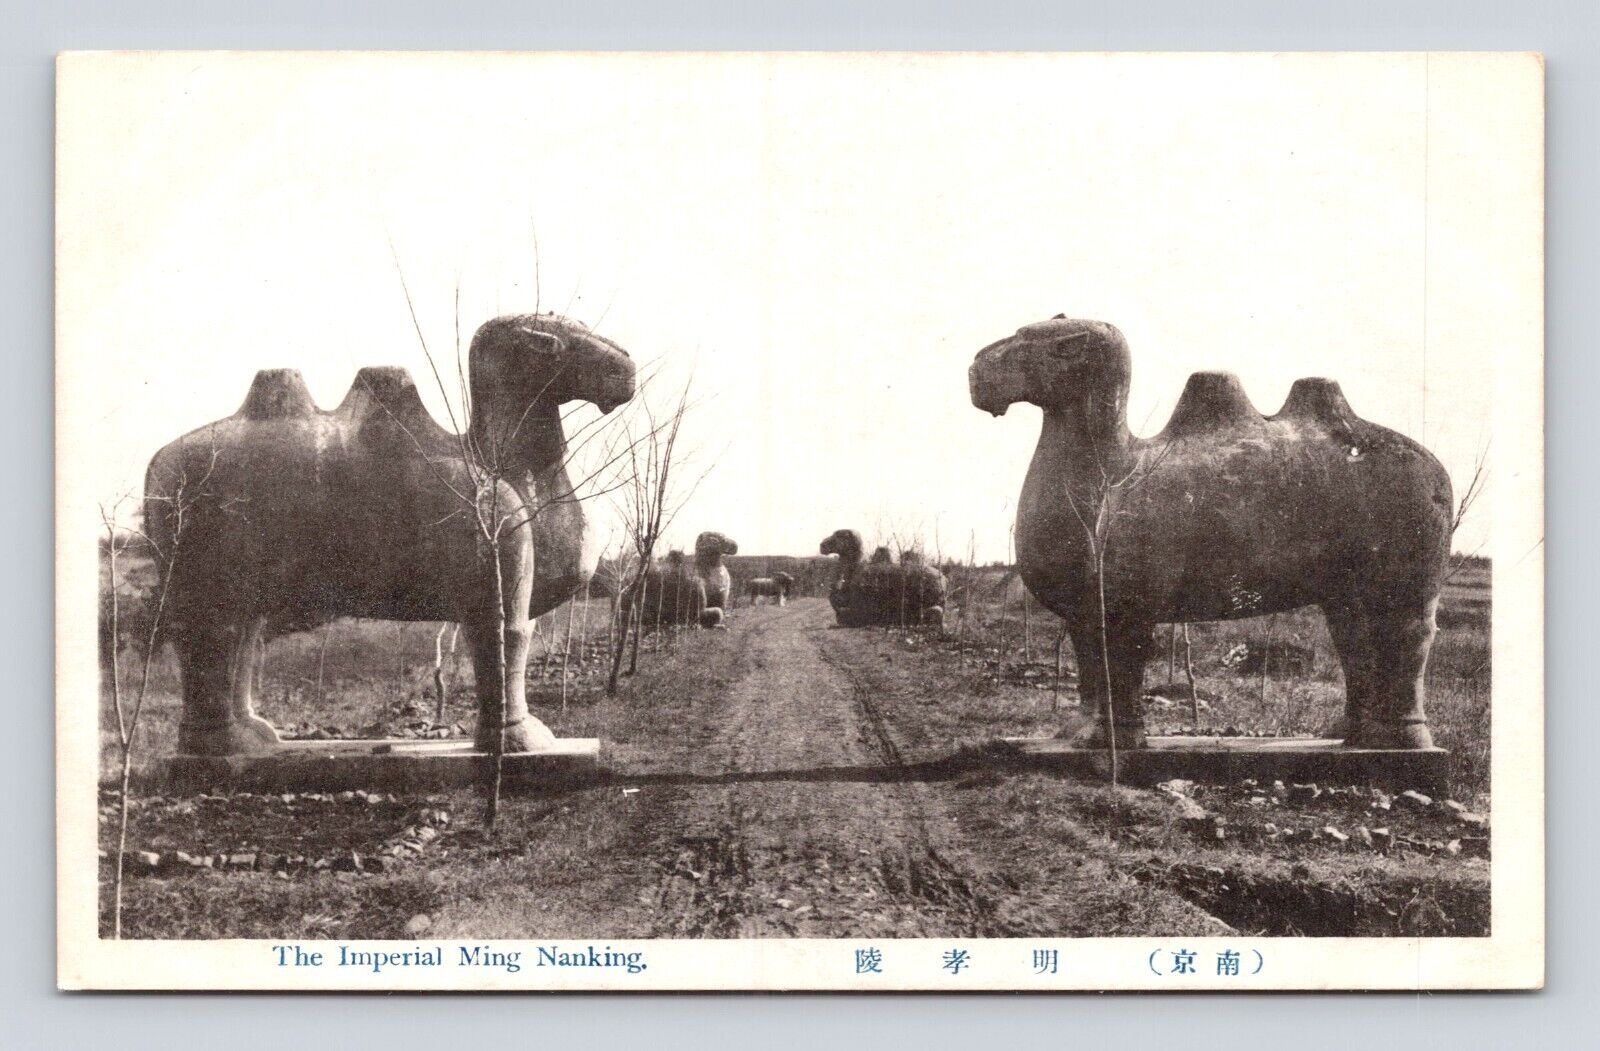 Antique Postcard RPPC Real Photo IMPERIAL MING NANKING CAMEL STATUES 1910